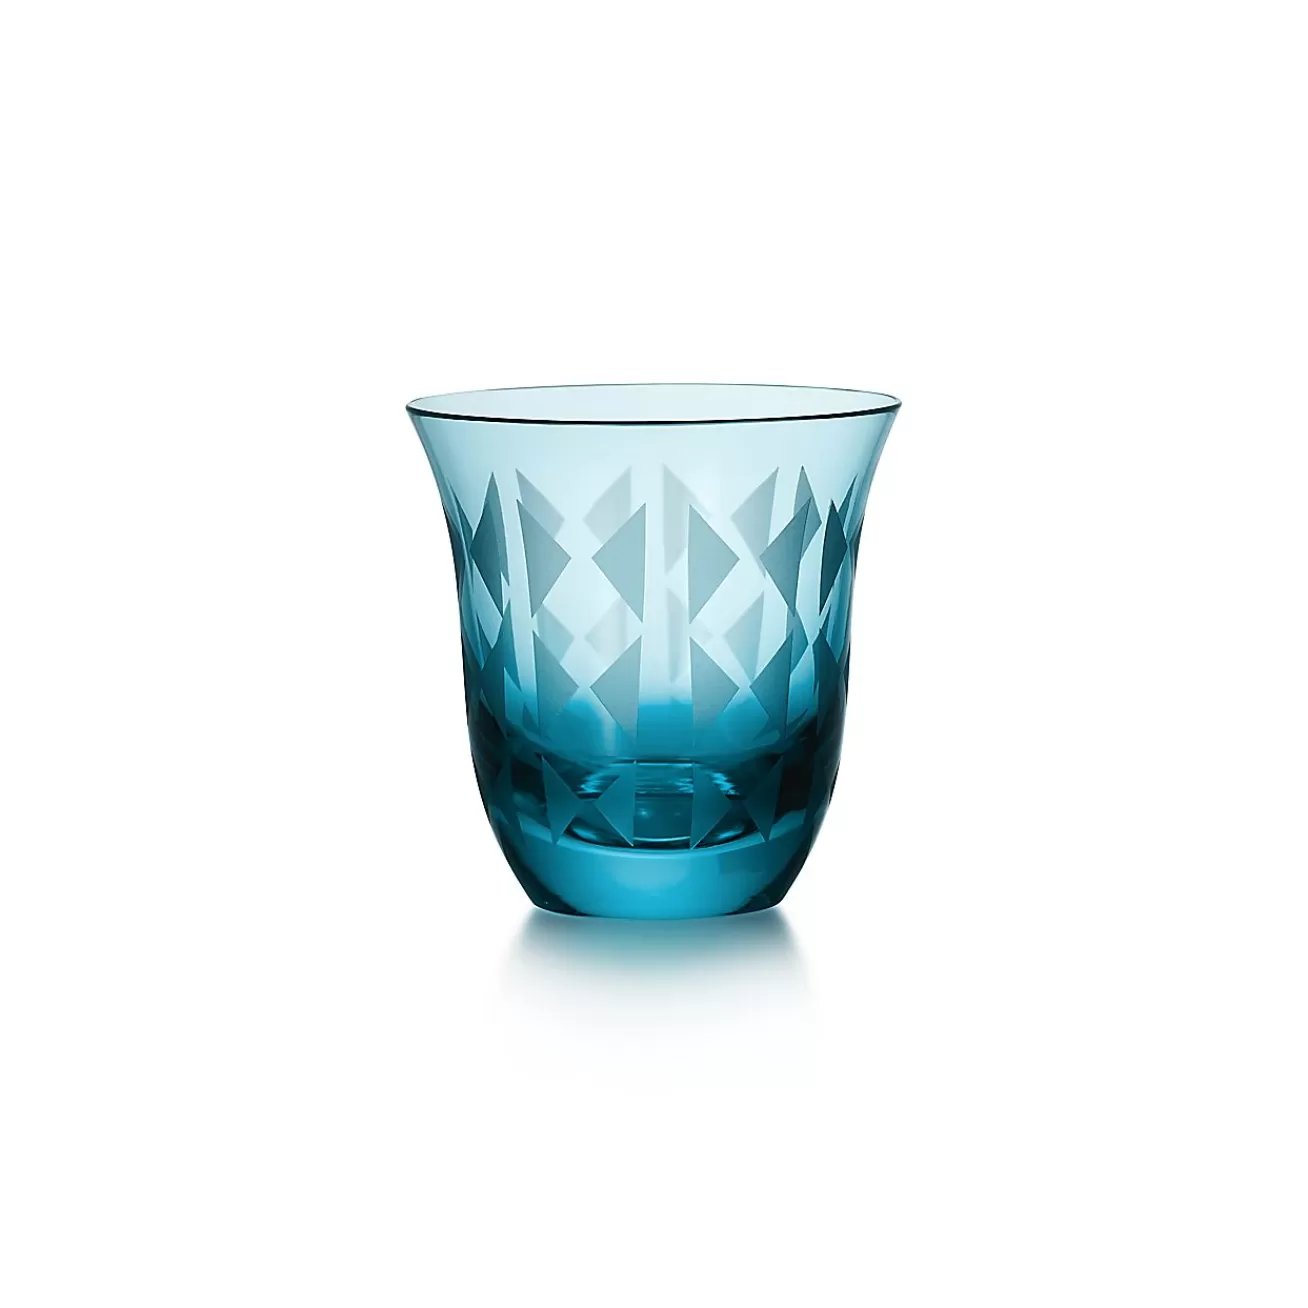 Tiffany & Co. Tiffany Berries Water Glass in Tiffany Blue® Lead Crystal | ^ The Home | Housewarming Gifts